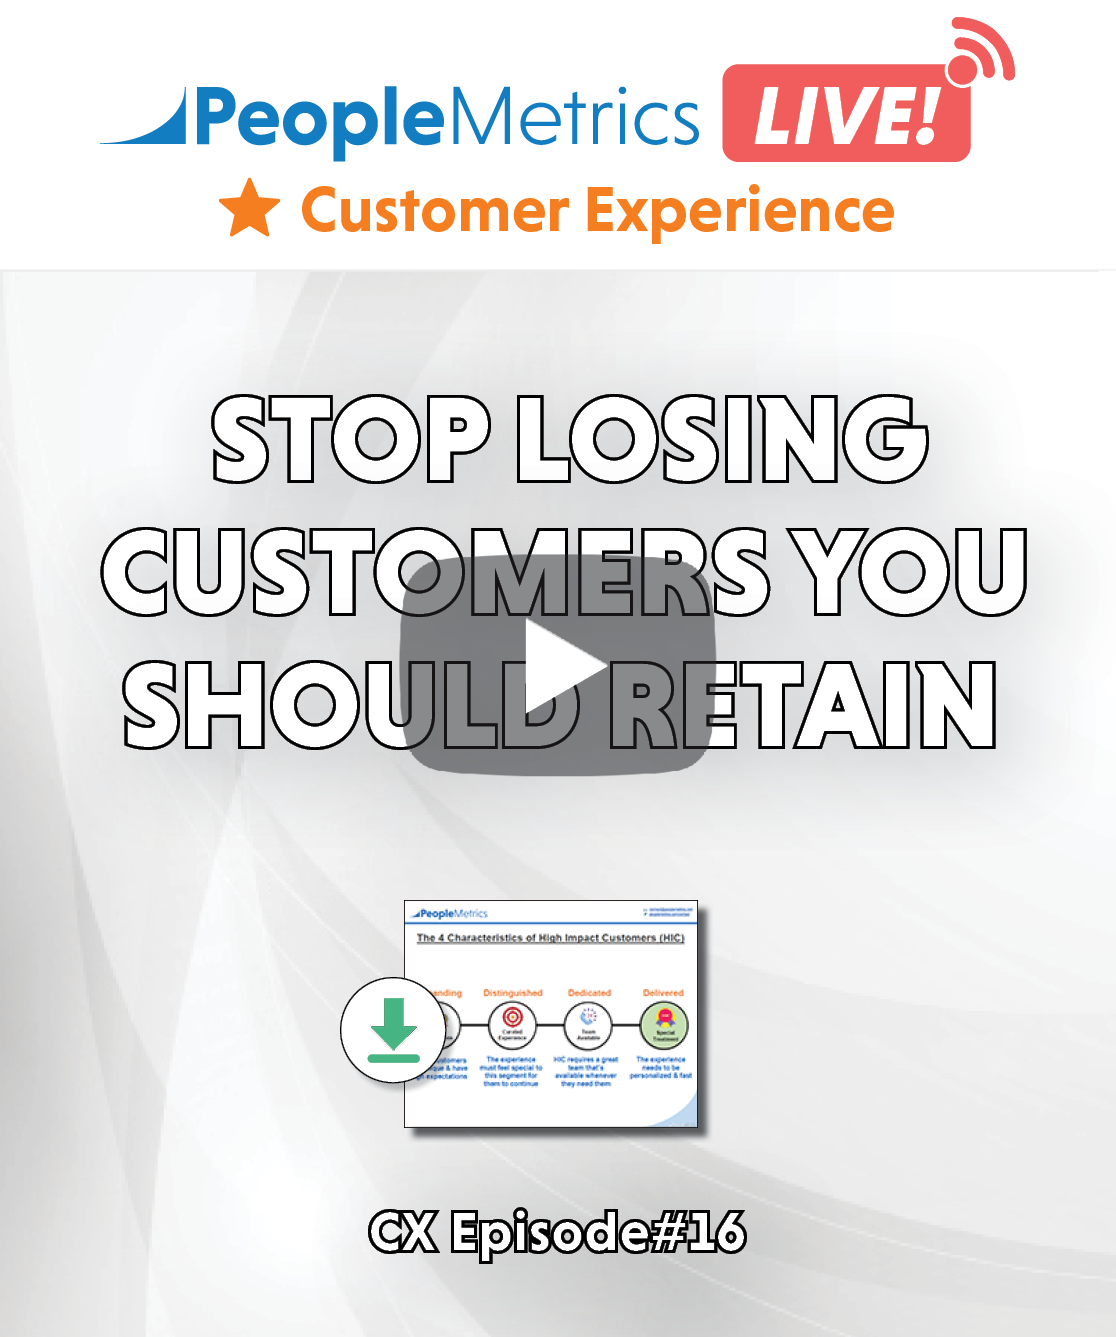 WATCH NOW: Stop Losing Customers You Should Retain